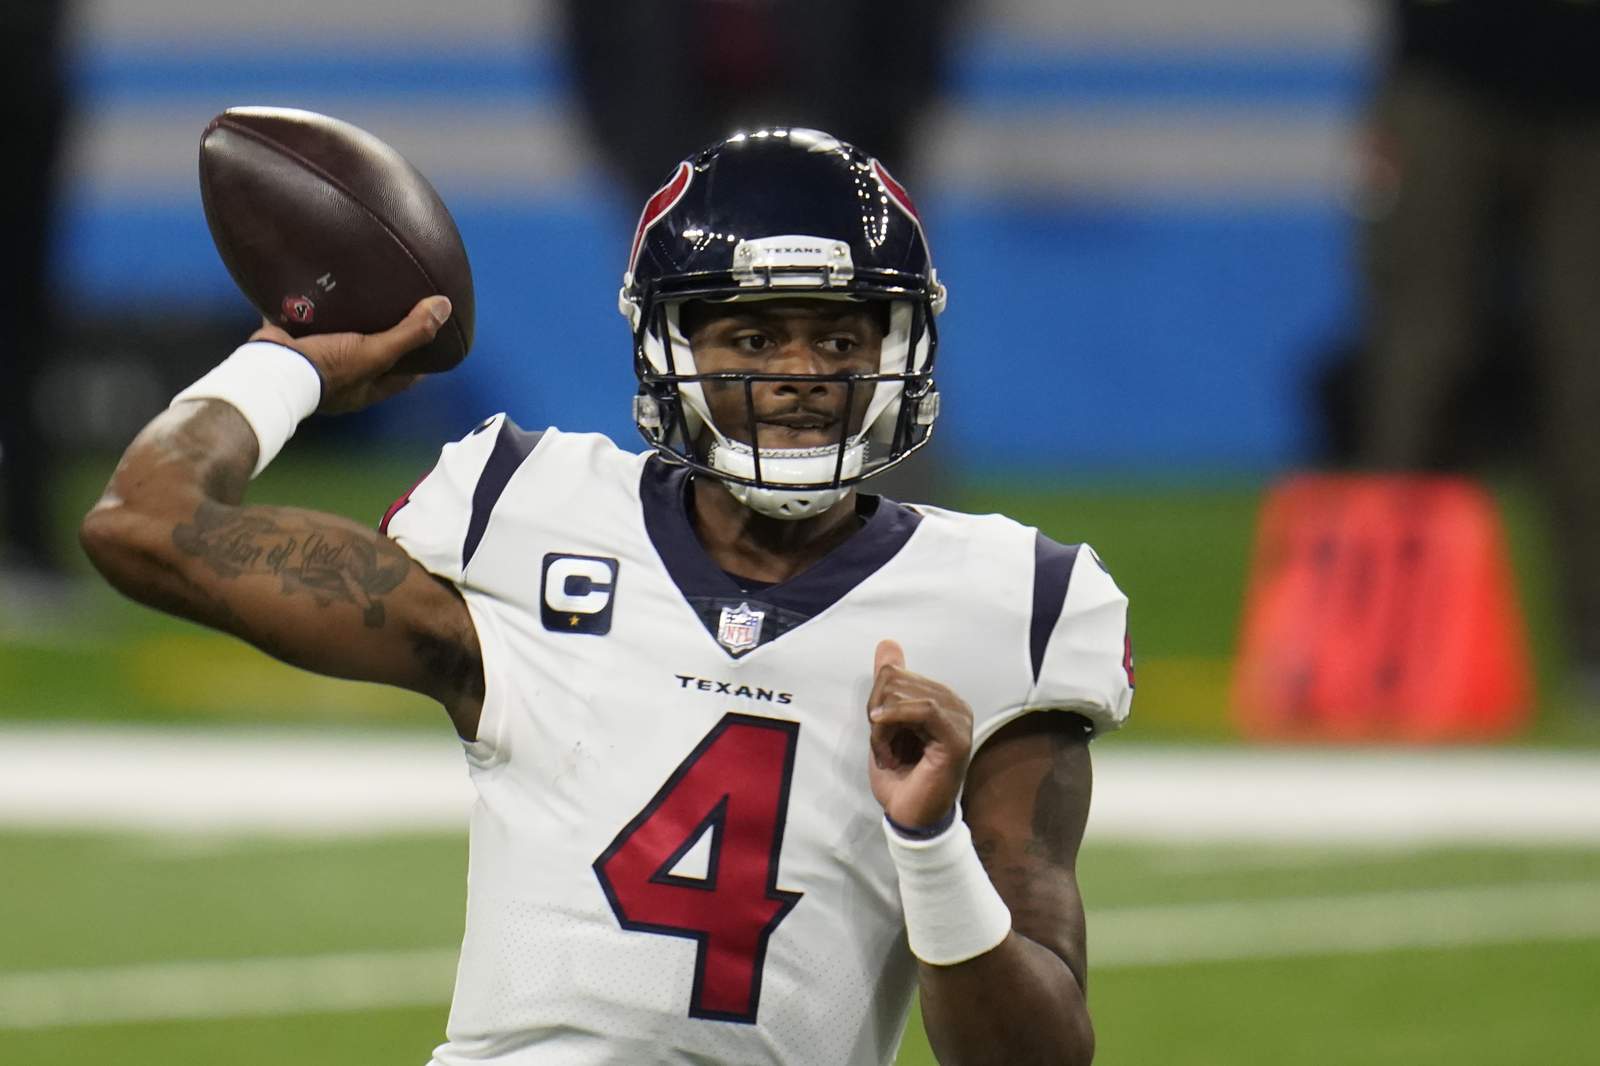 3 takeaways from the Texans blowout loss to the Bears